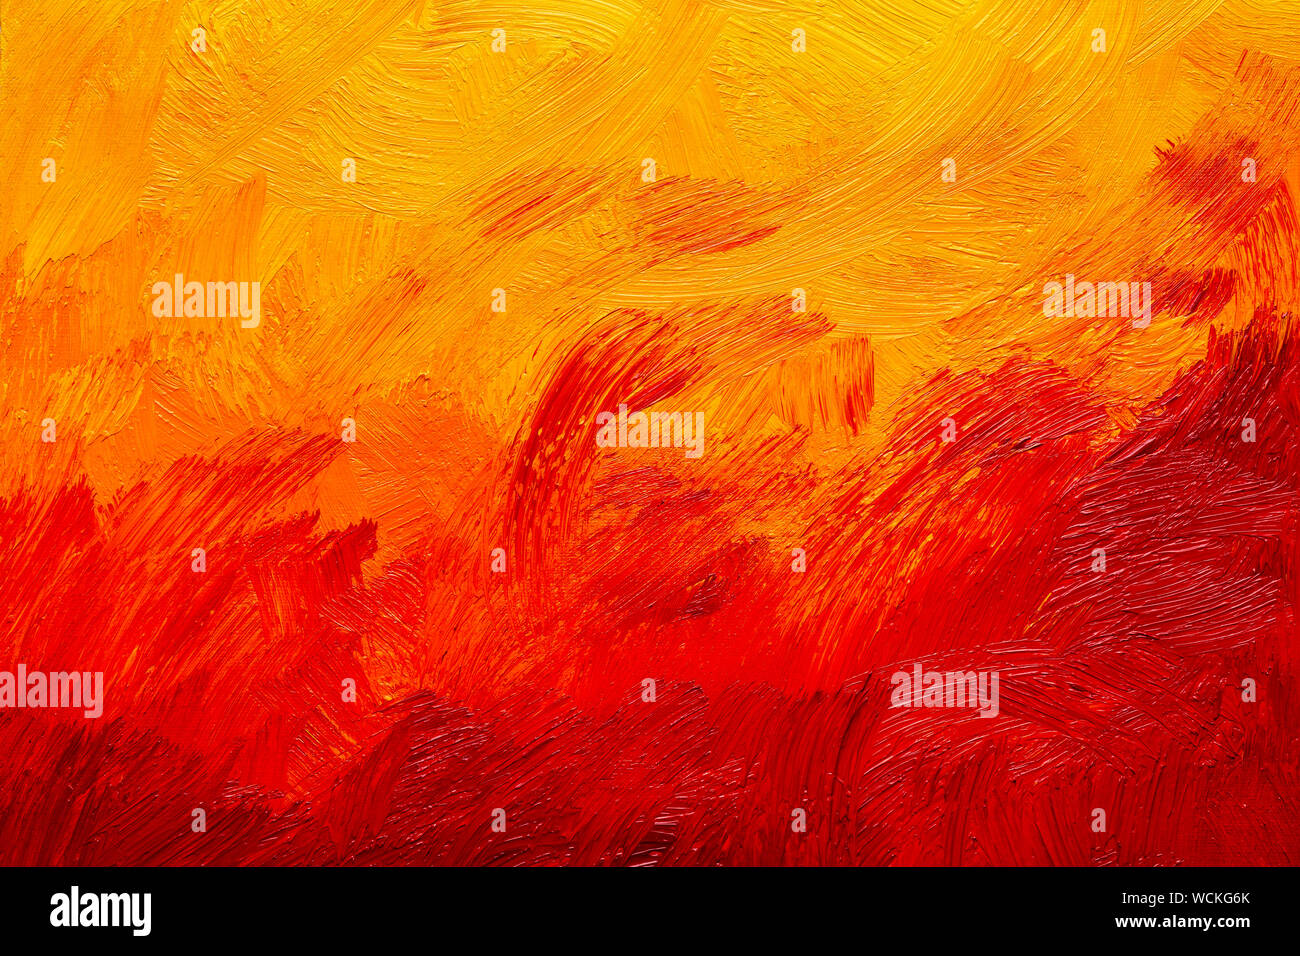 Abstract Red Orange And Yellow Brush Strokes Real Oil Painting On Canvas By Hand Full Frame Stock Photo Alamy